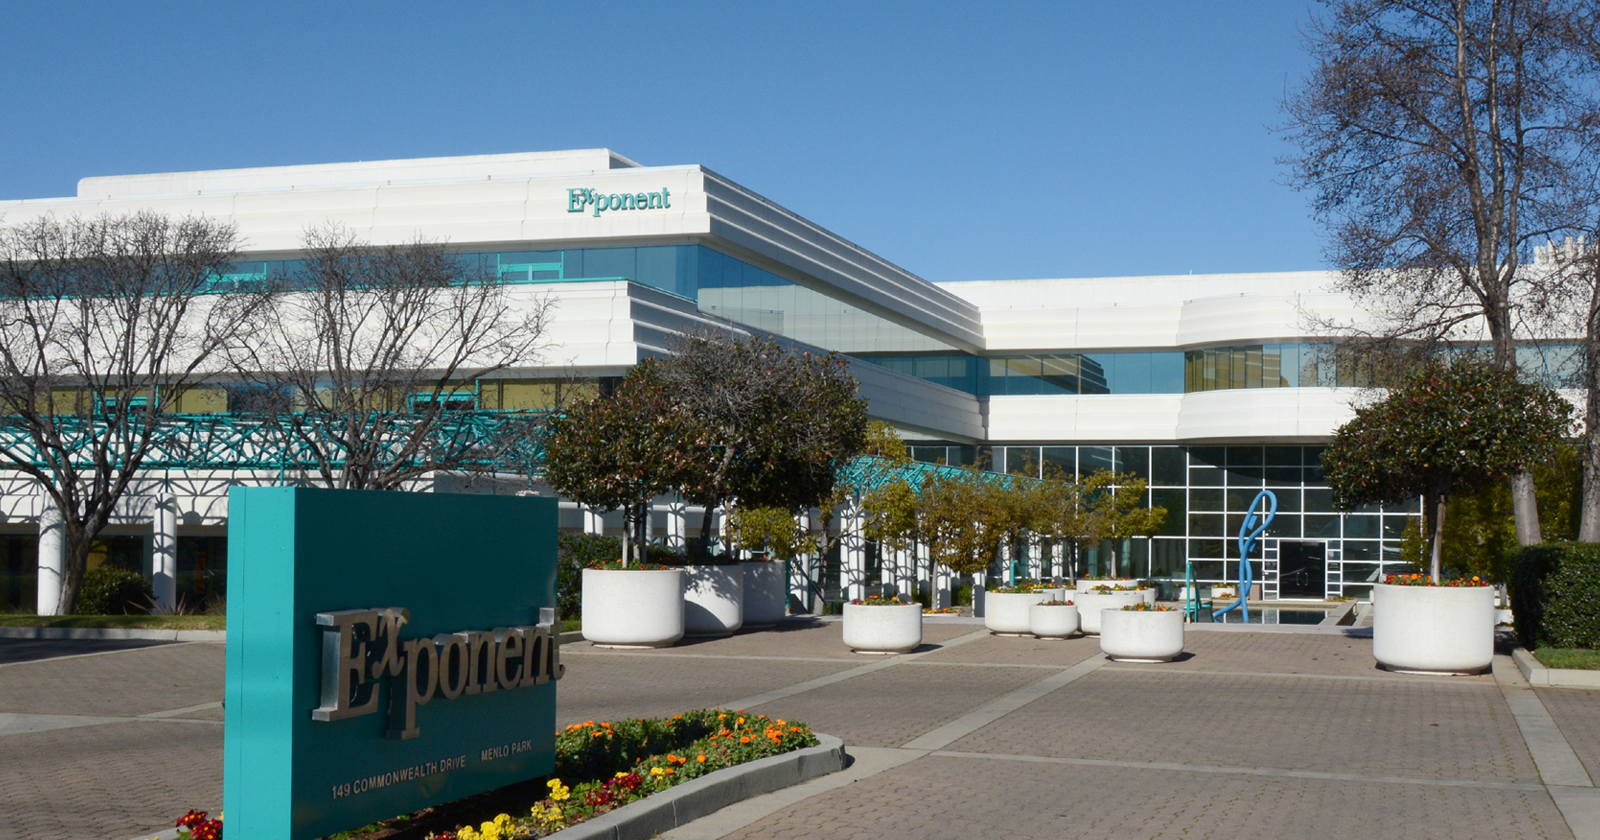 Exponent headquarters, in Menlo Park, CA, a premier global engineering and scientific consulting firm that delivers breakthrough insights.